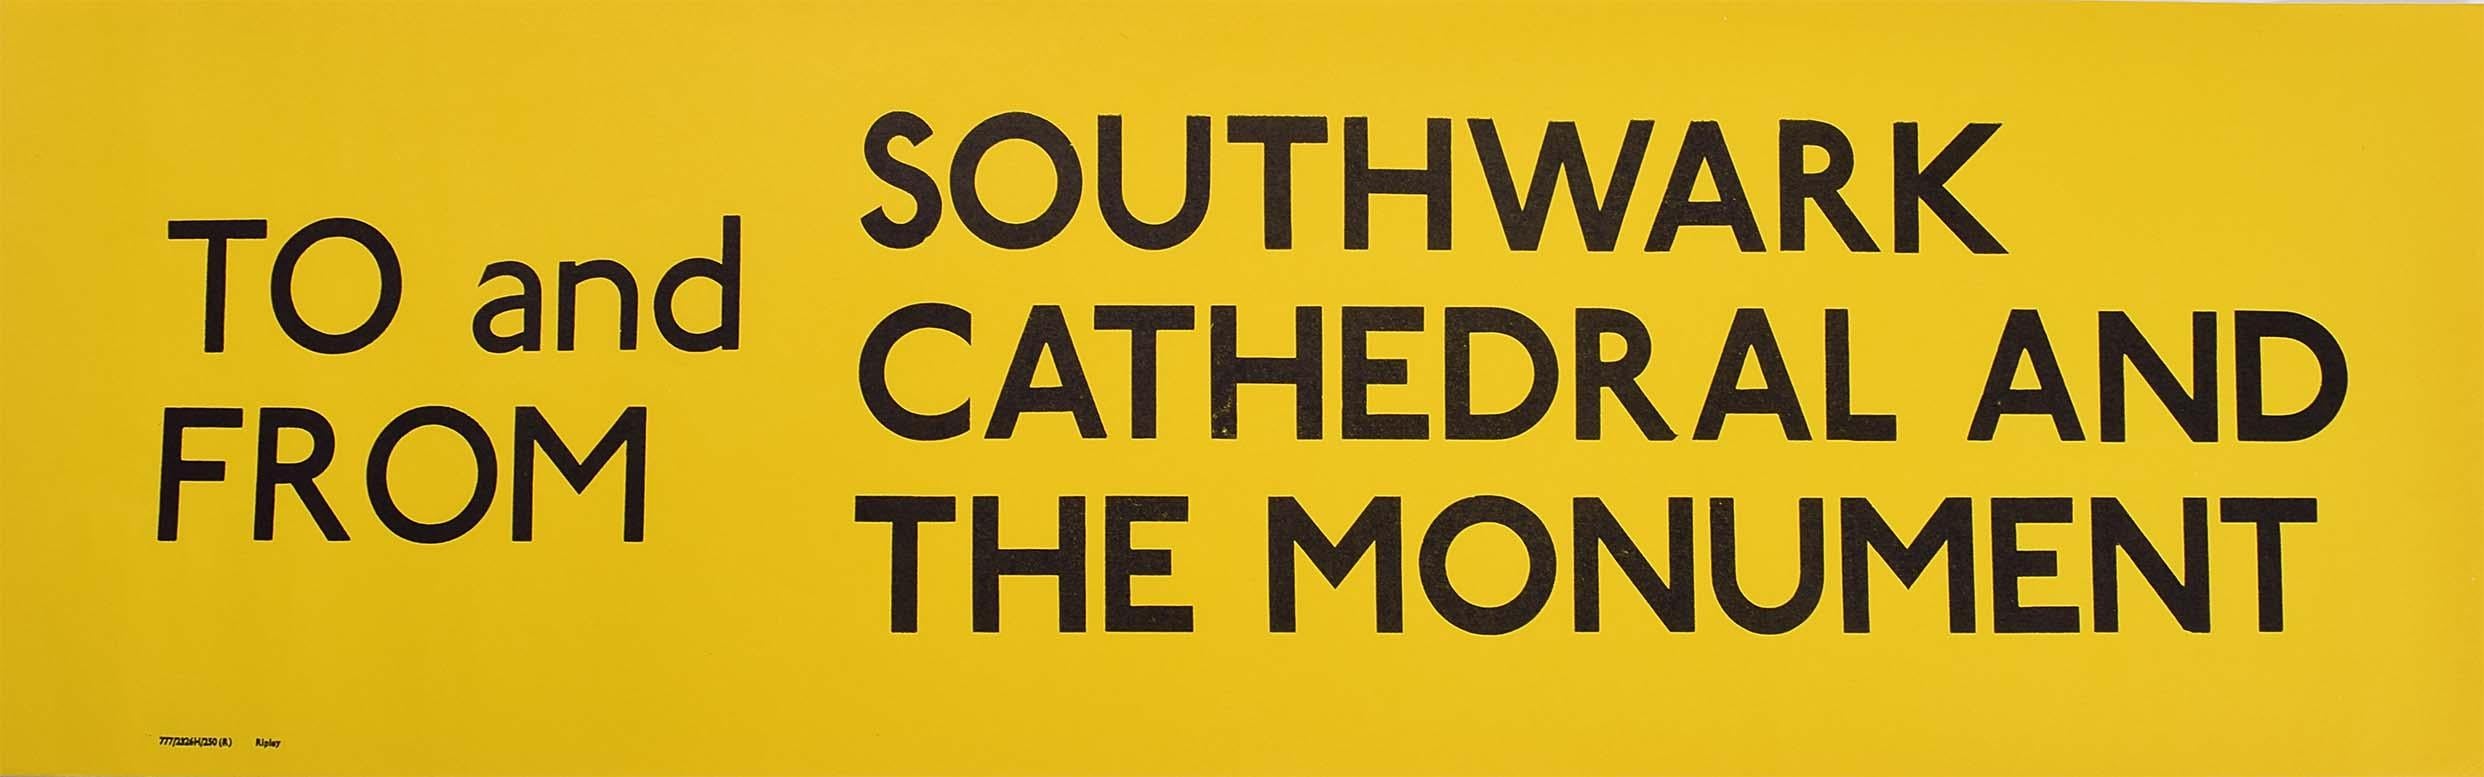 Unknown Print - Southwark Cathedral and the Monument London England Routemaster Bus sign c. 1970